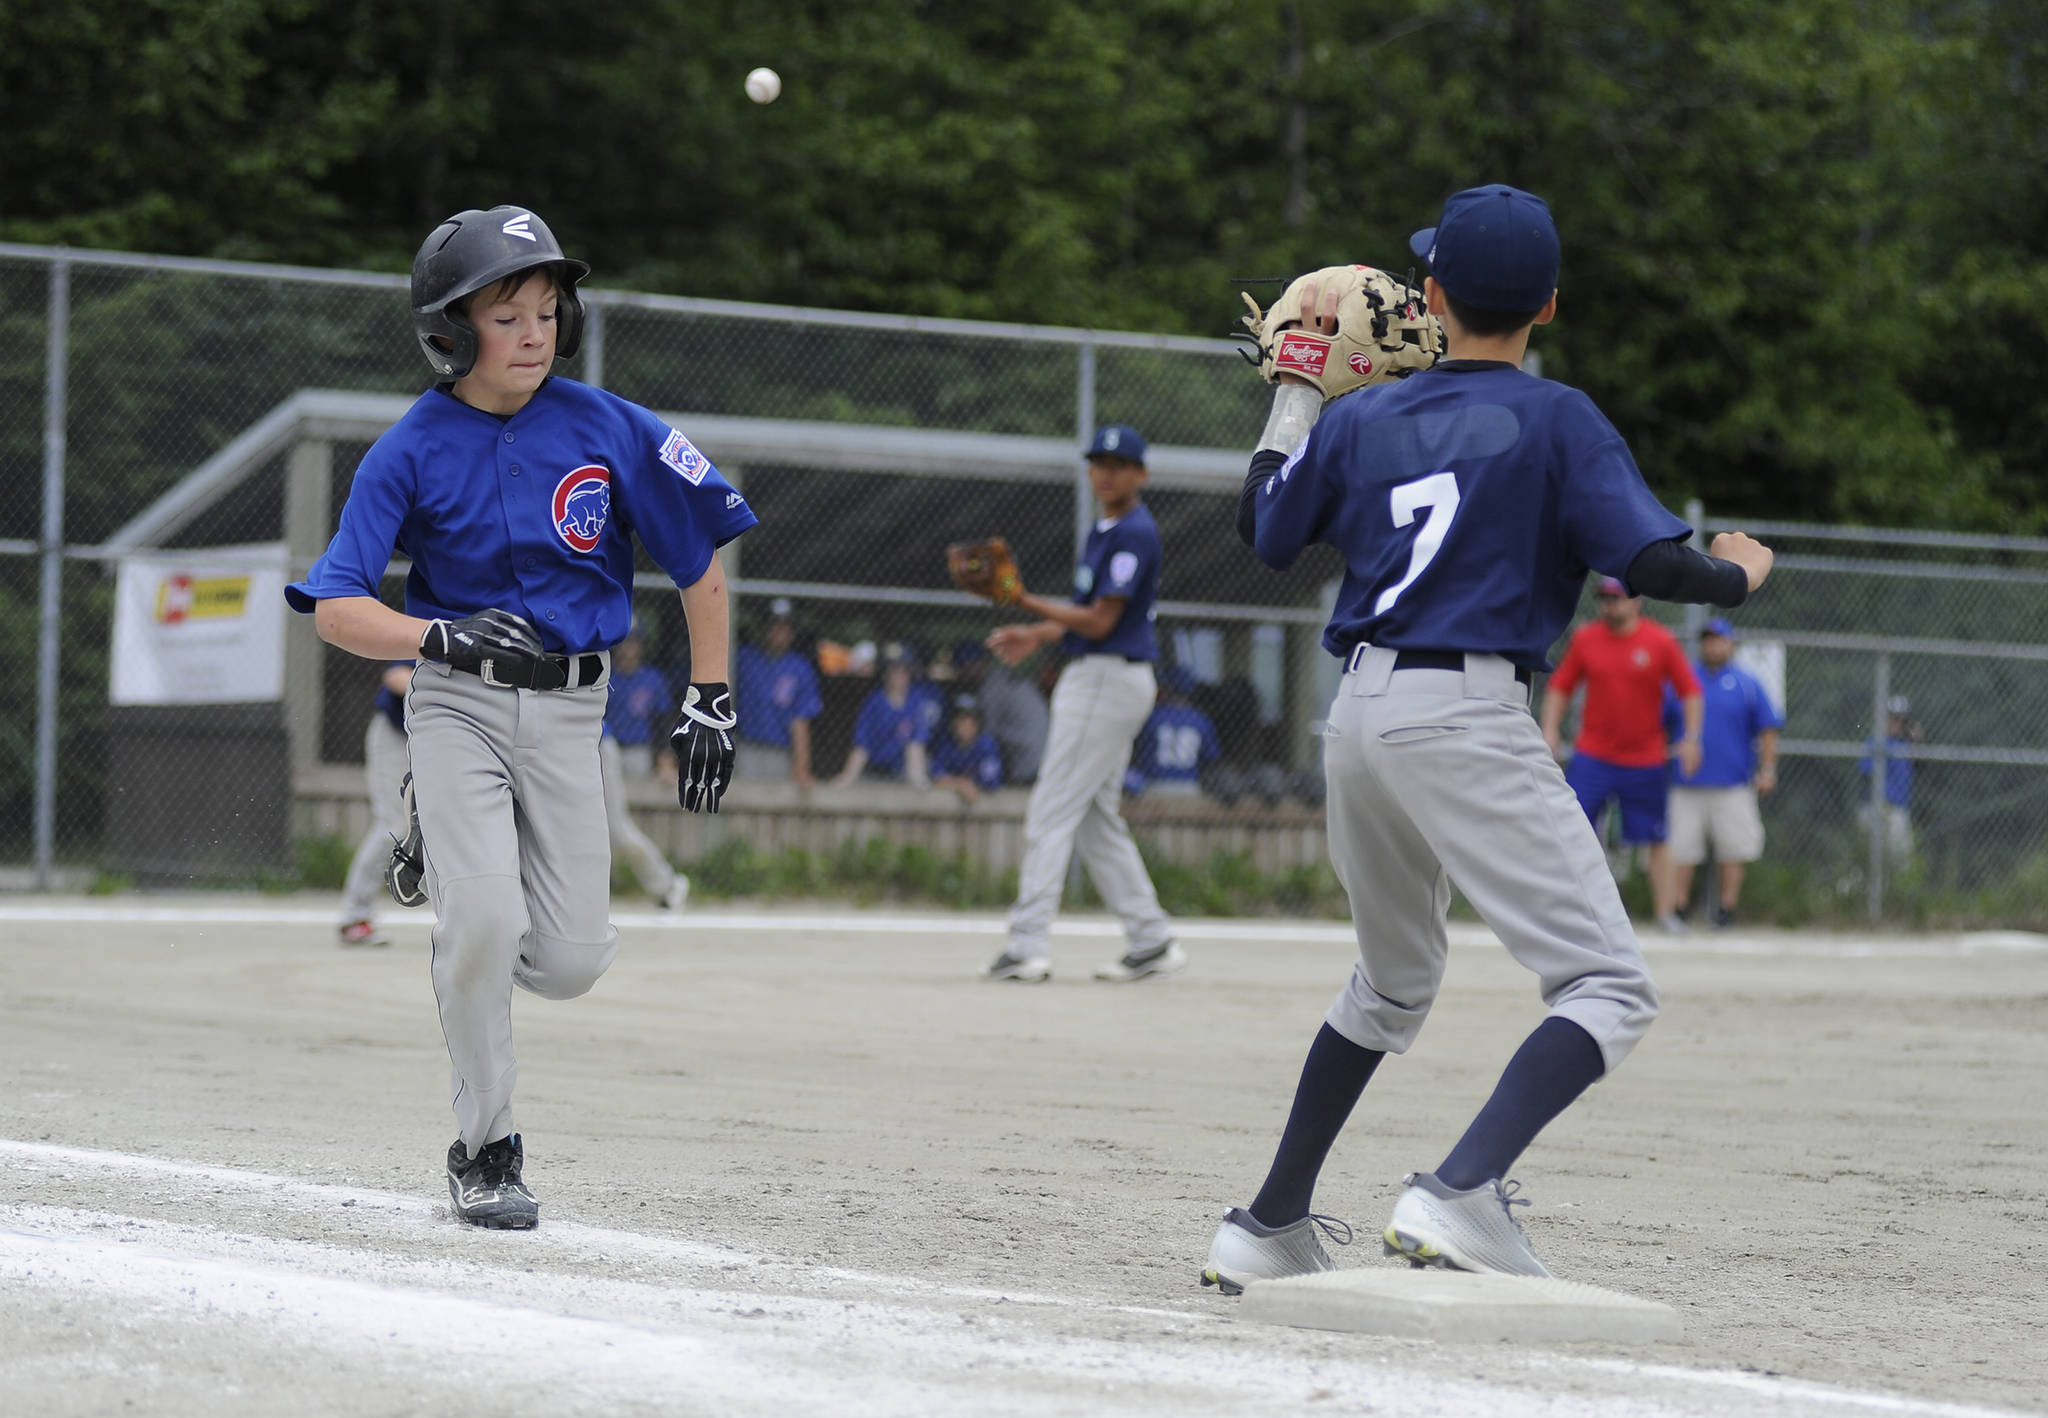 Cubs player Joey Ramseth runs toward first base after bunting the ball to score Ezra Vidal in the first inning of the Gastineau Channel Little League Major Division Championship game on Saturday at Miller Field. Ramseth was safe on the play. (Nolin Ainsworth | Juneau Empire)